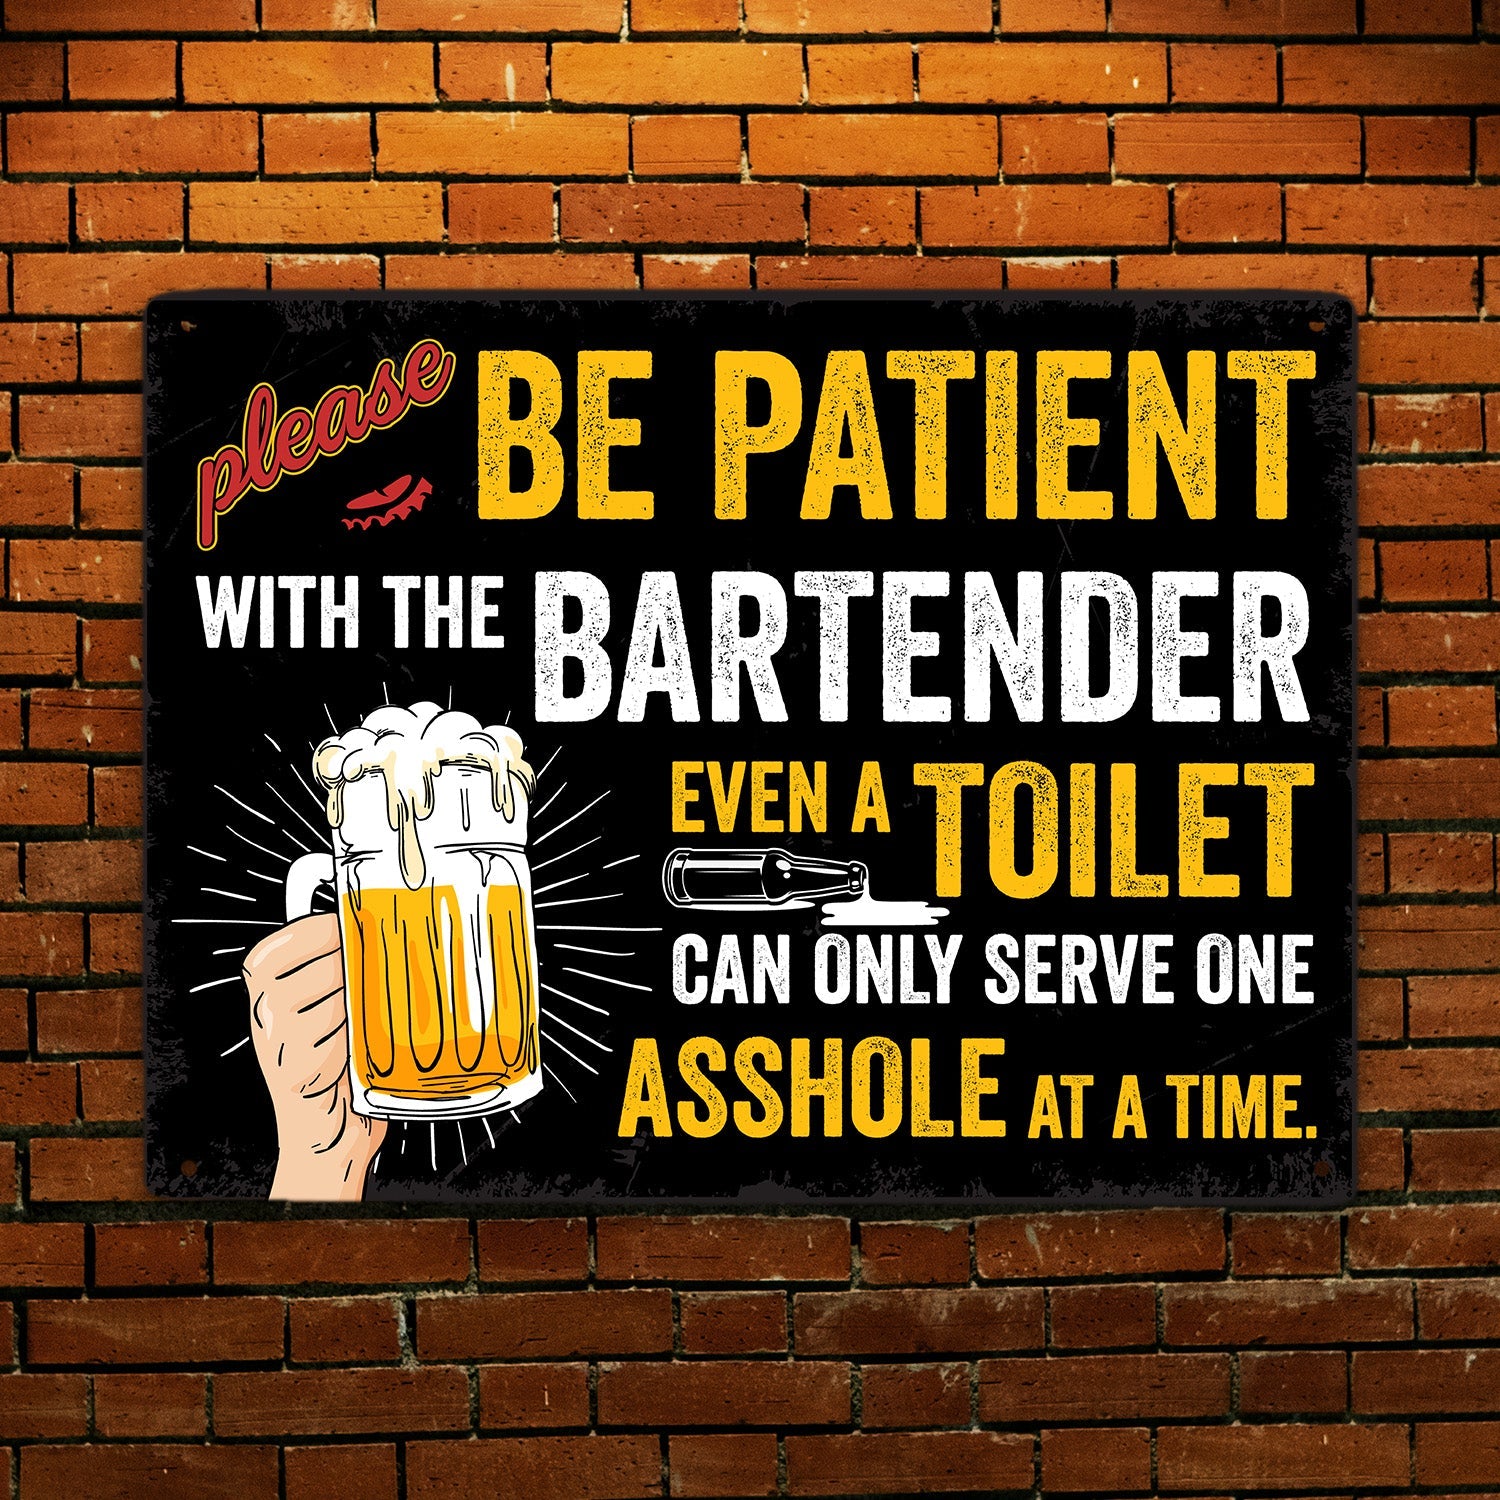 Please Be Patient With The Bartender